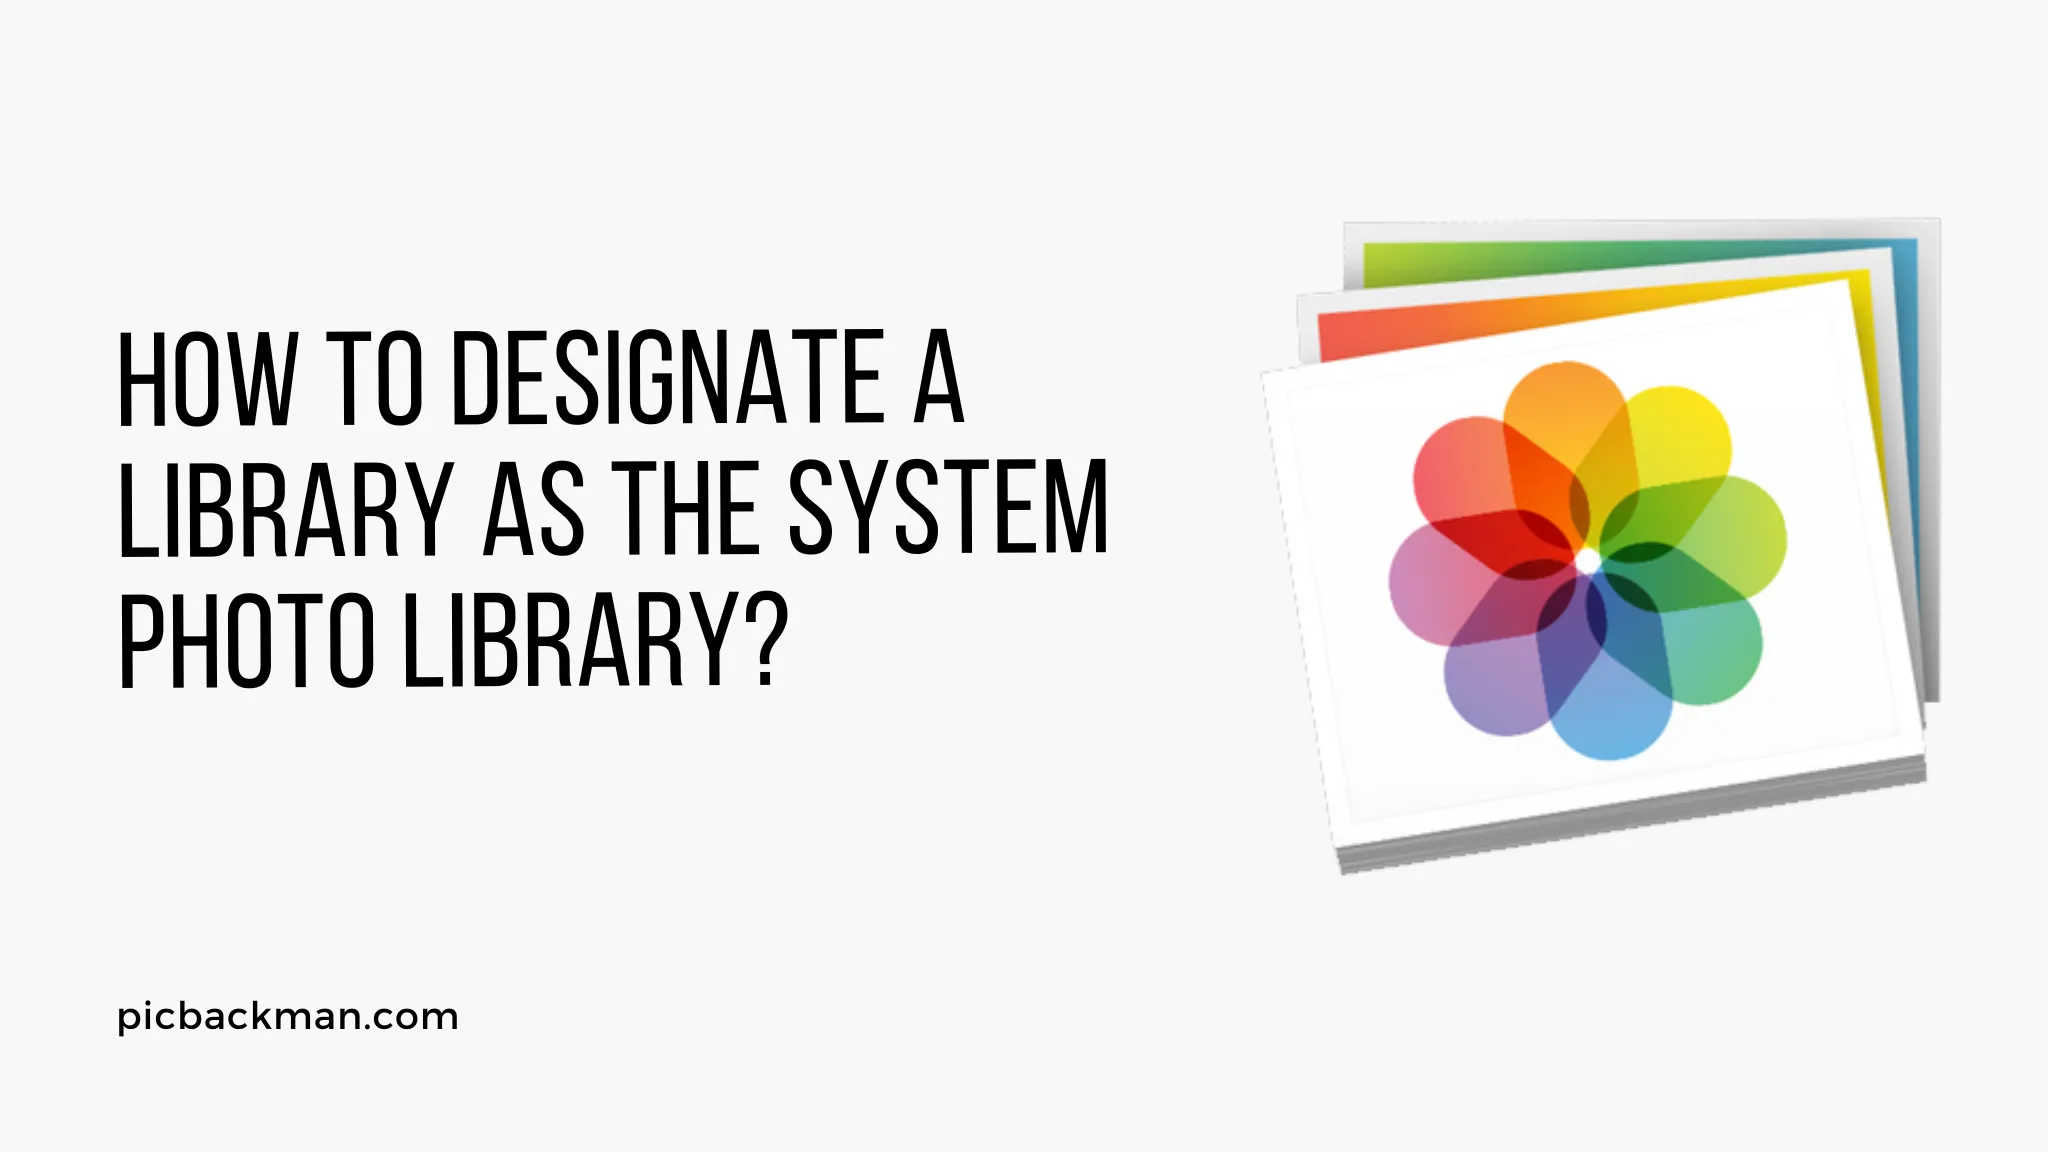 How to Designate a Library as the System Photo Library?